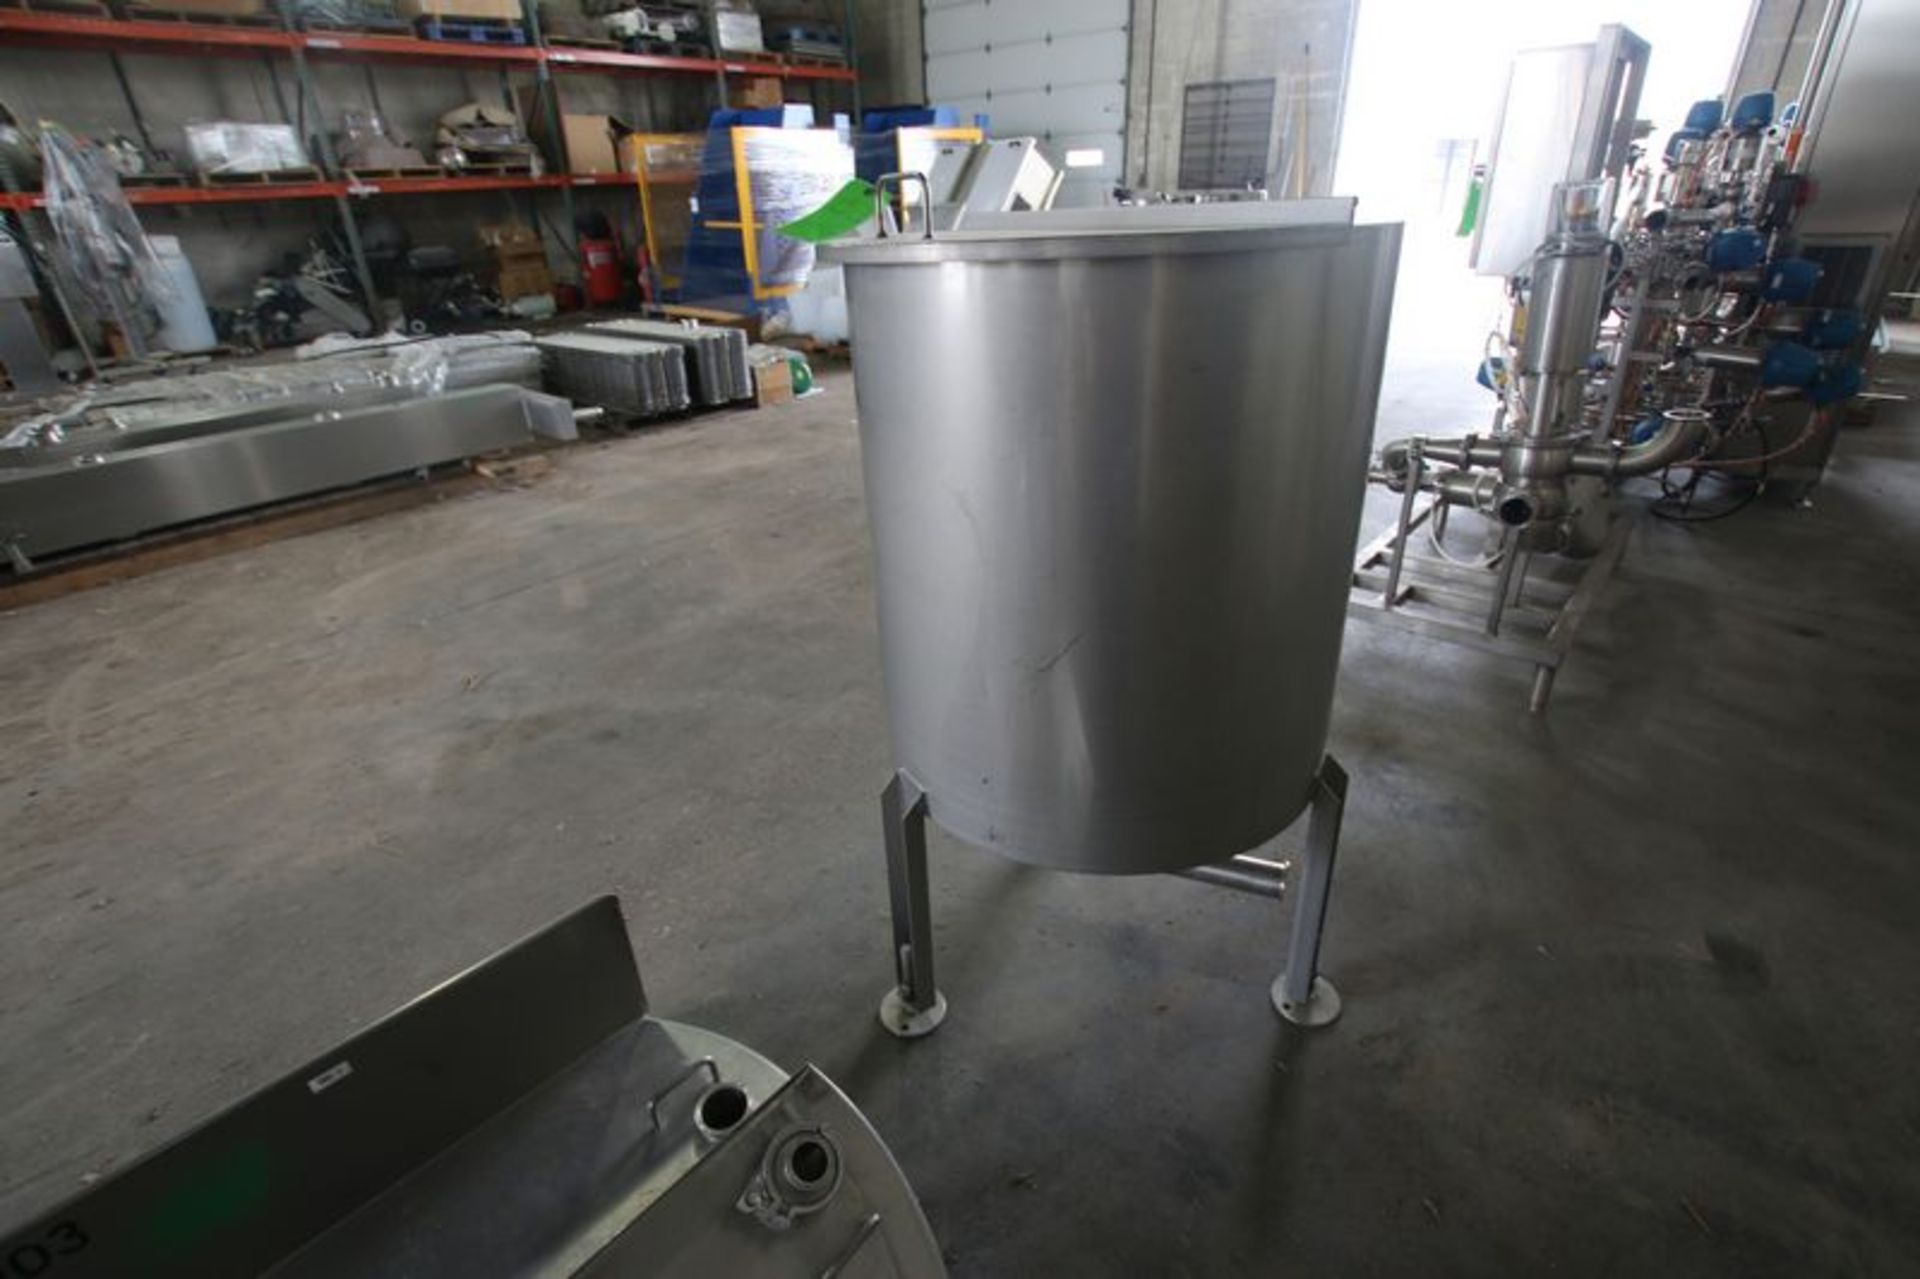 S/S Hinged Lid Storage Tank. Approx Dims: 33" L x 30" Dia***Located in Truck Wash Bay - Bild 3 aus 4